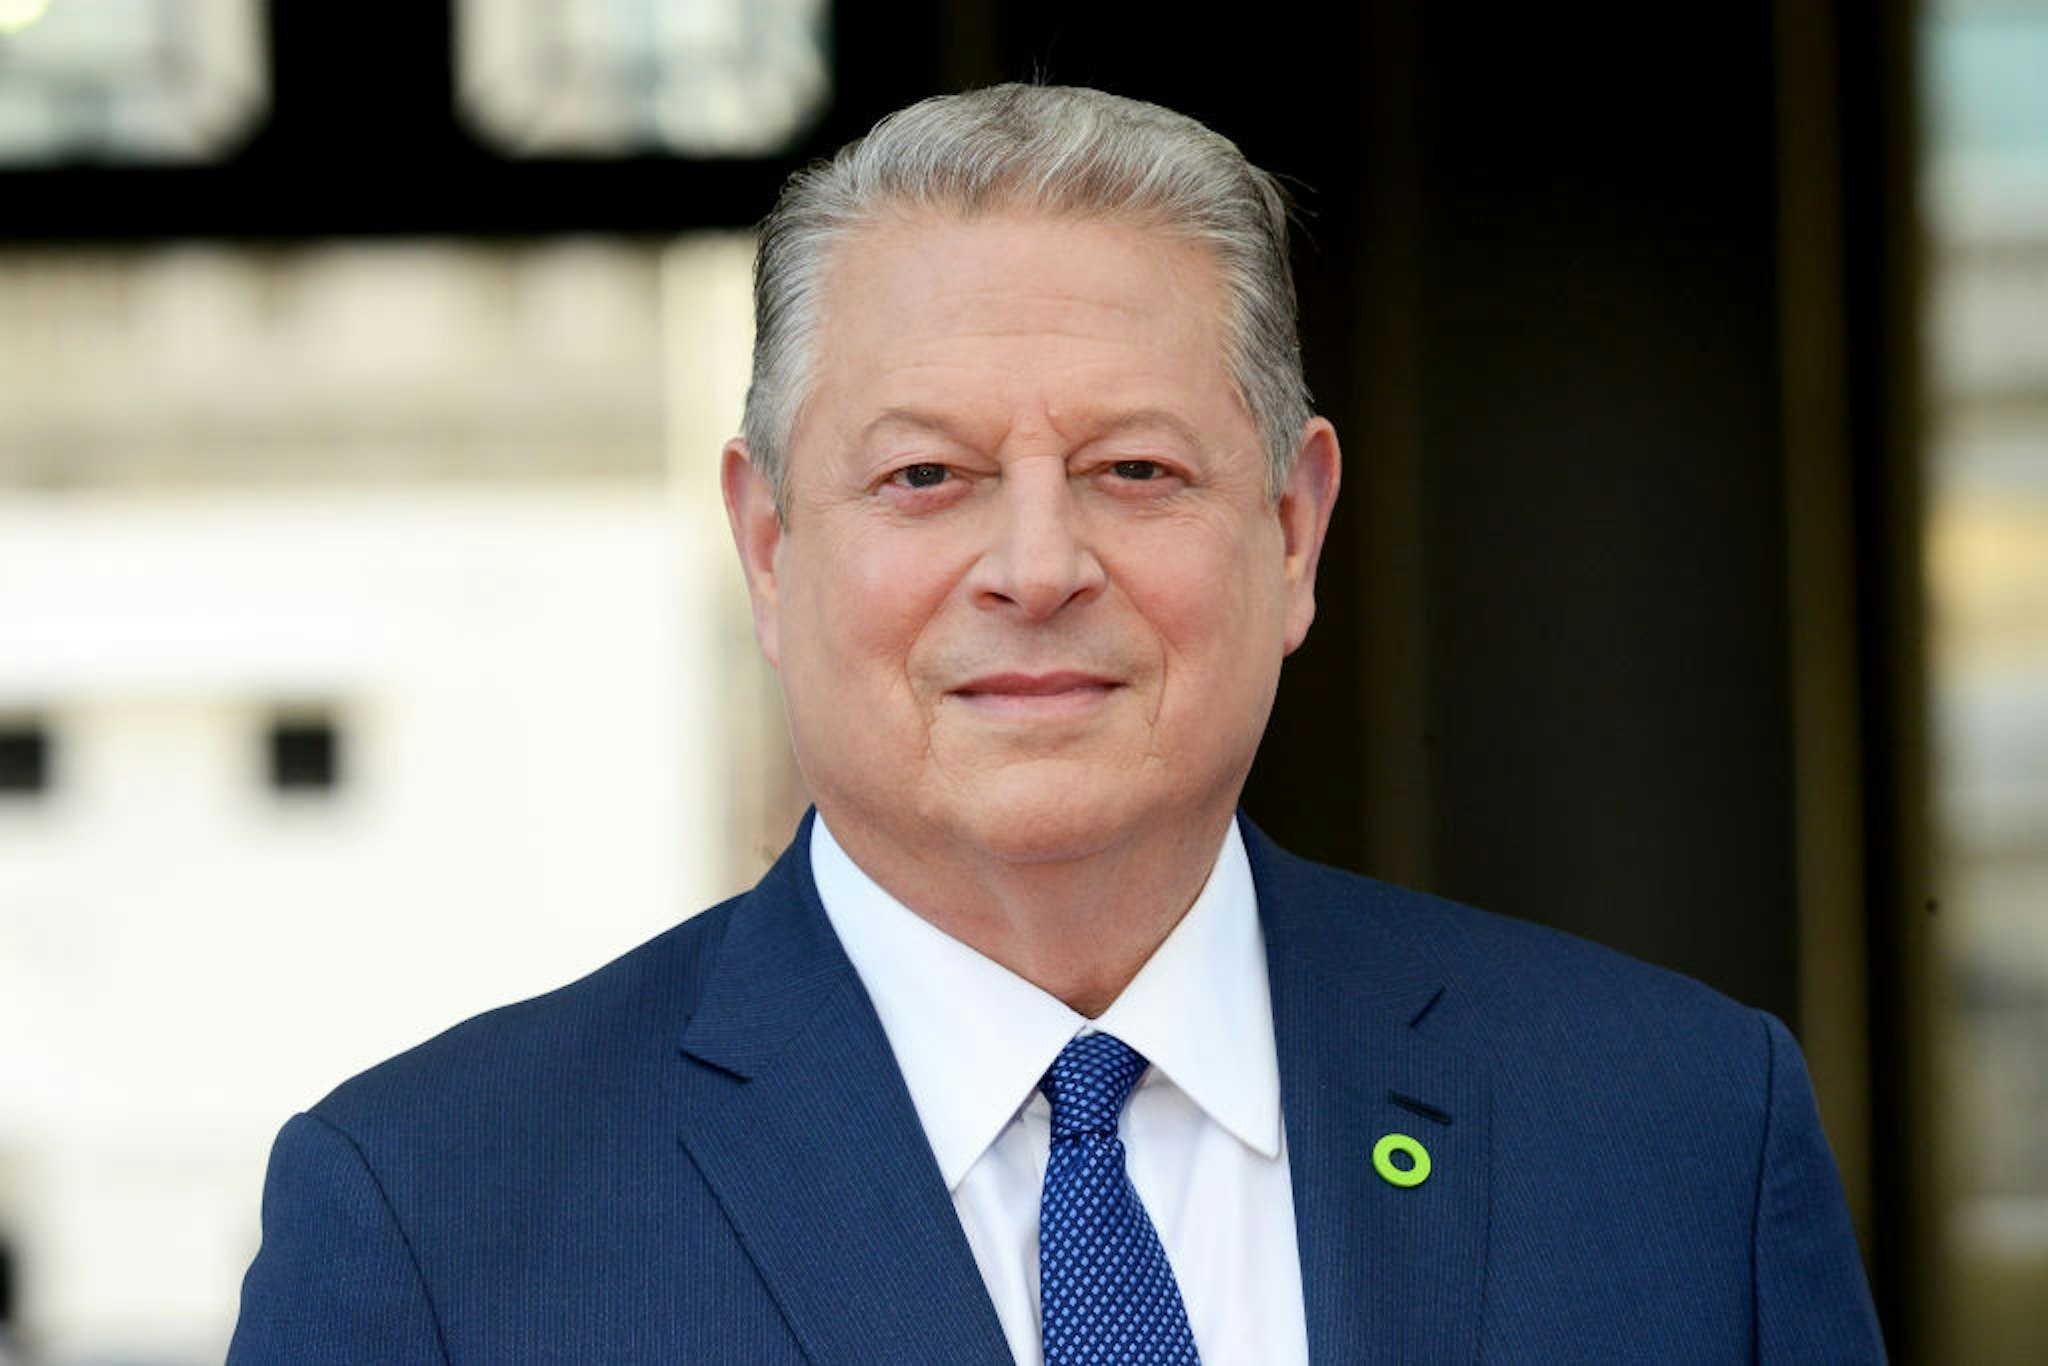 LONDON, ENGLAND - AUGUST 10: Former Vice President of the United States Al Gore attends the UK premiere of 'An Inconvenient Sequel: Power To Truth' at Somerset House on August 10, 2017 in London, England. (Photo by Dave J Hogan/Dave J Hogan/Getty Images)